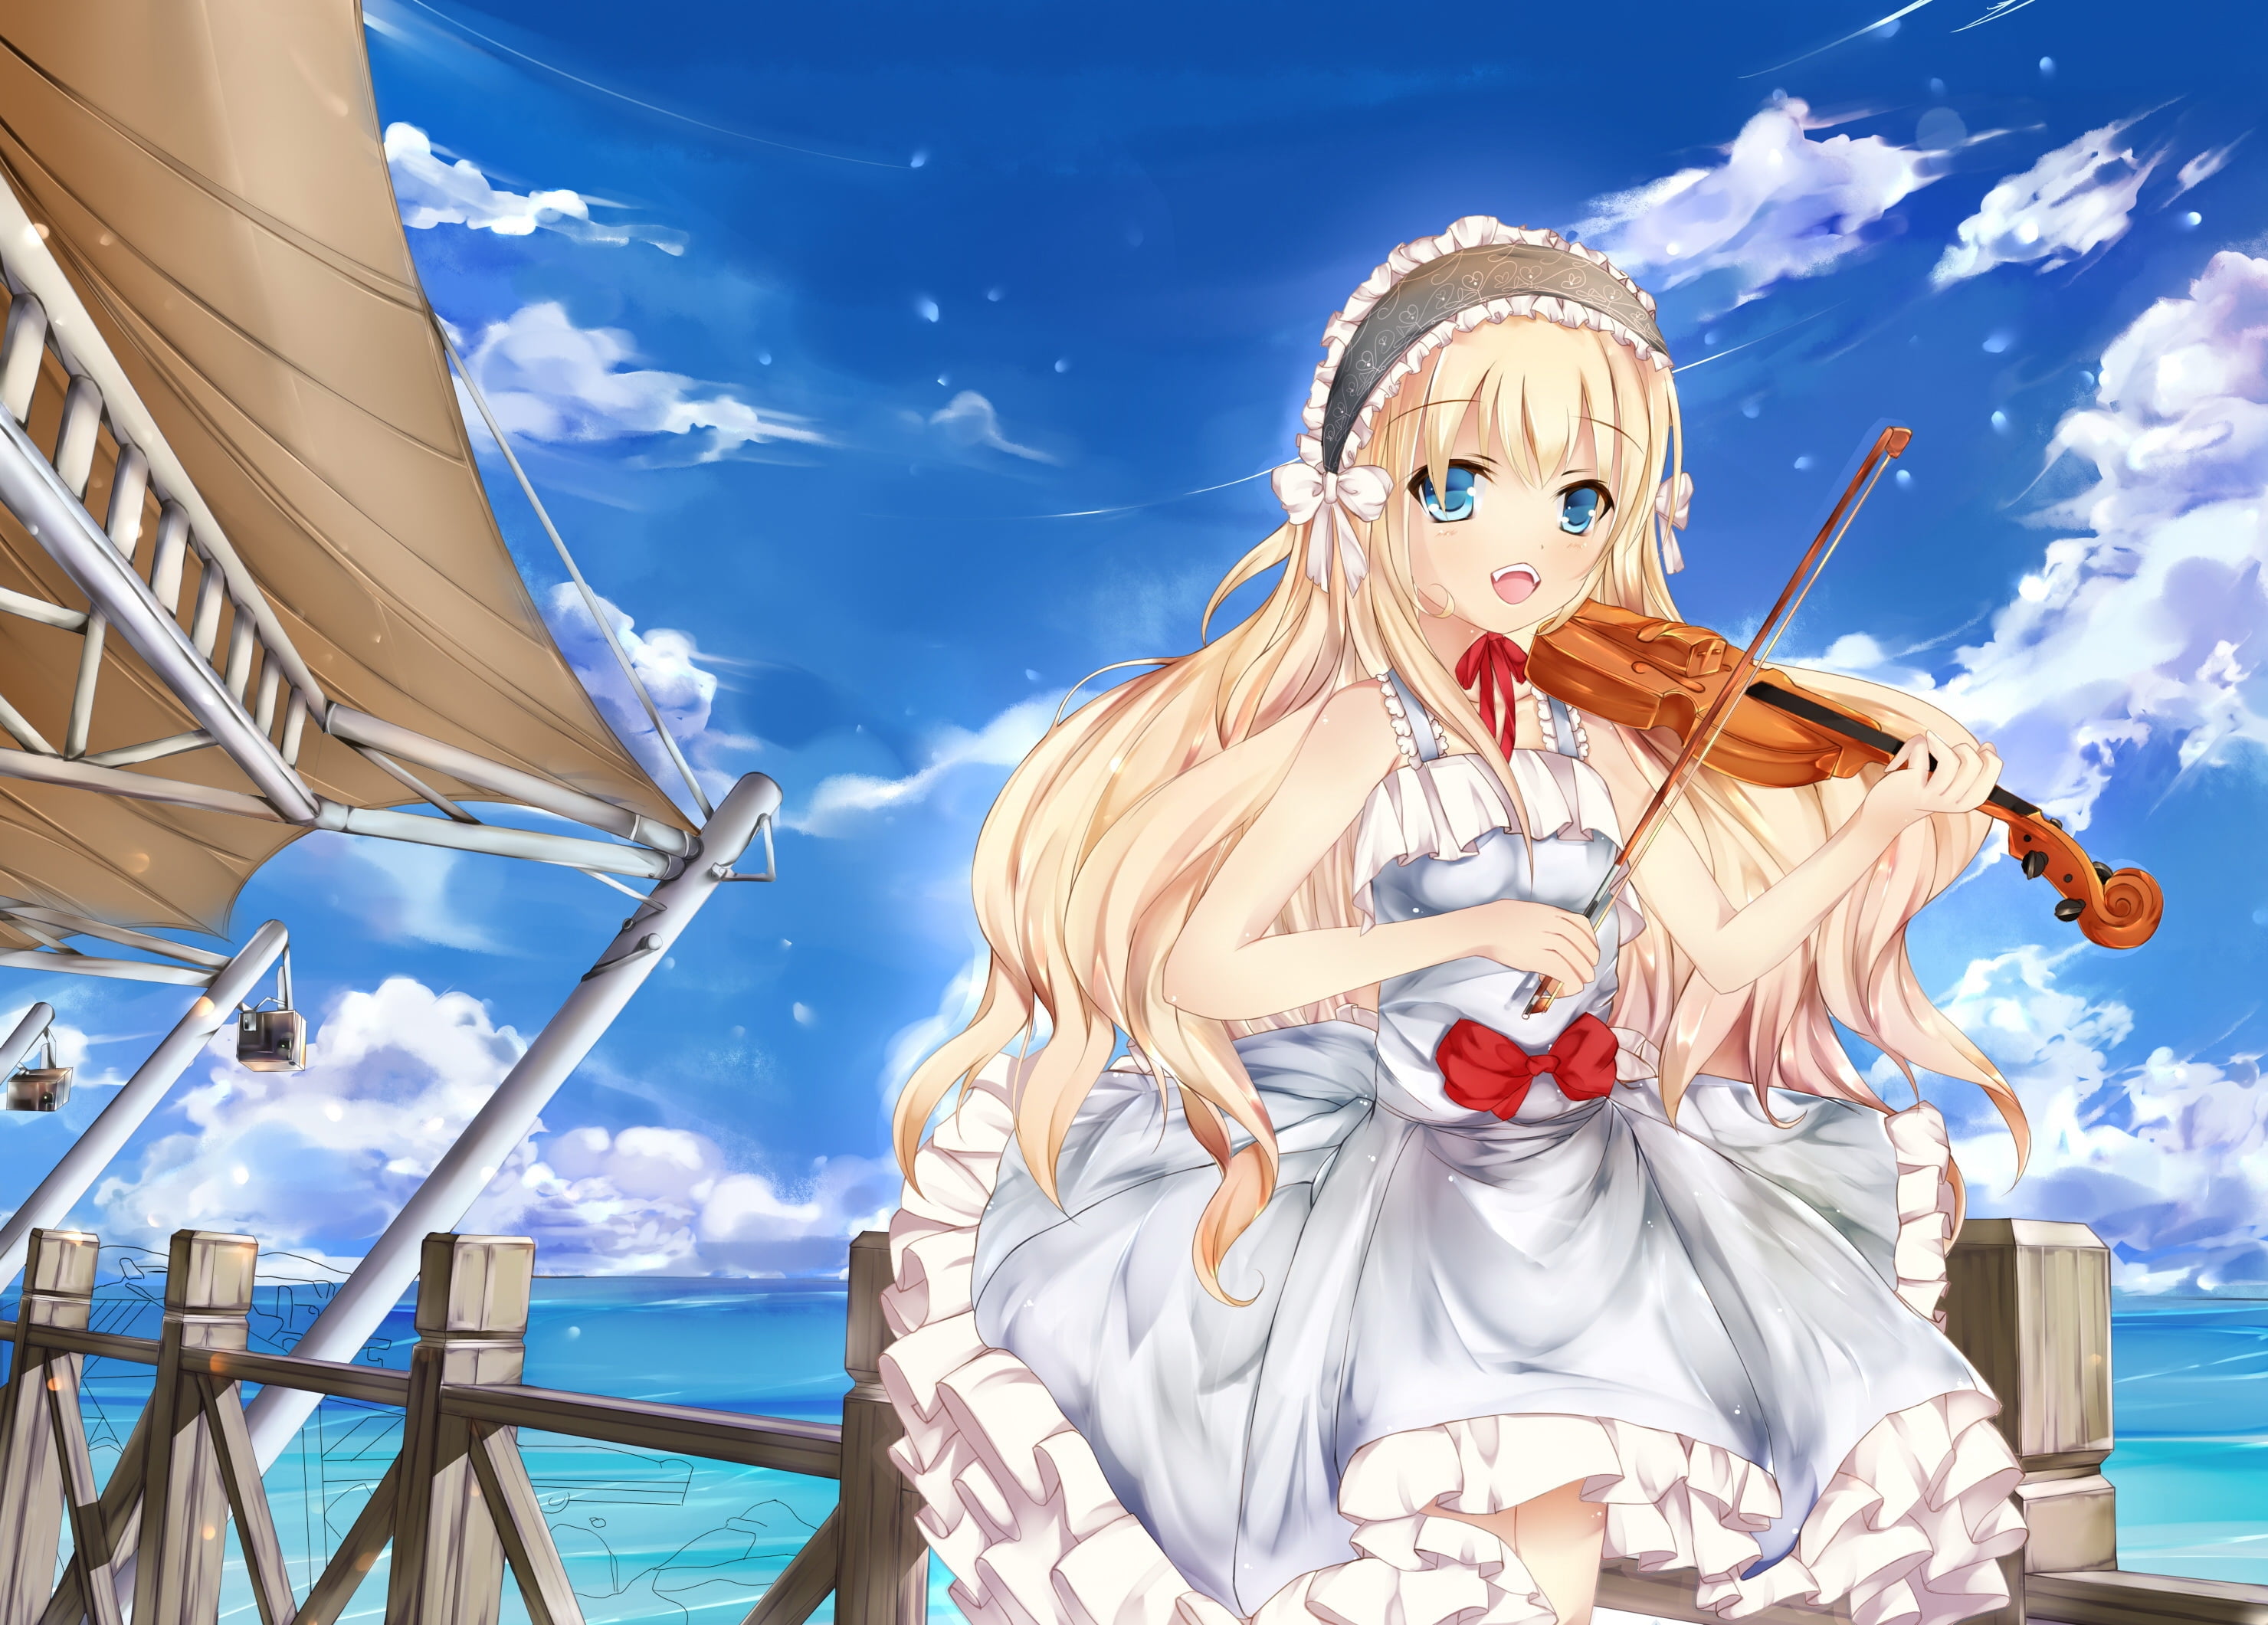 X Resolution White Haired Girl Anime Character Playing Violin